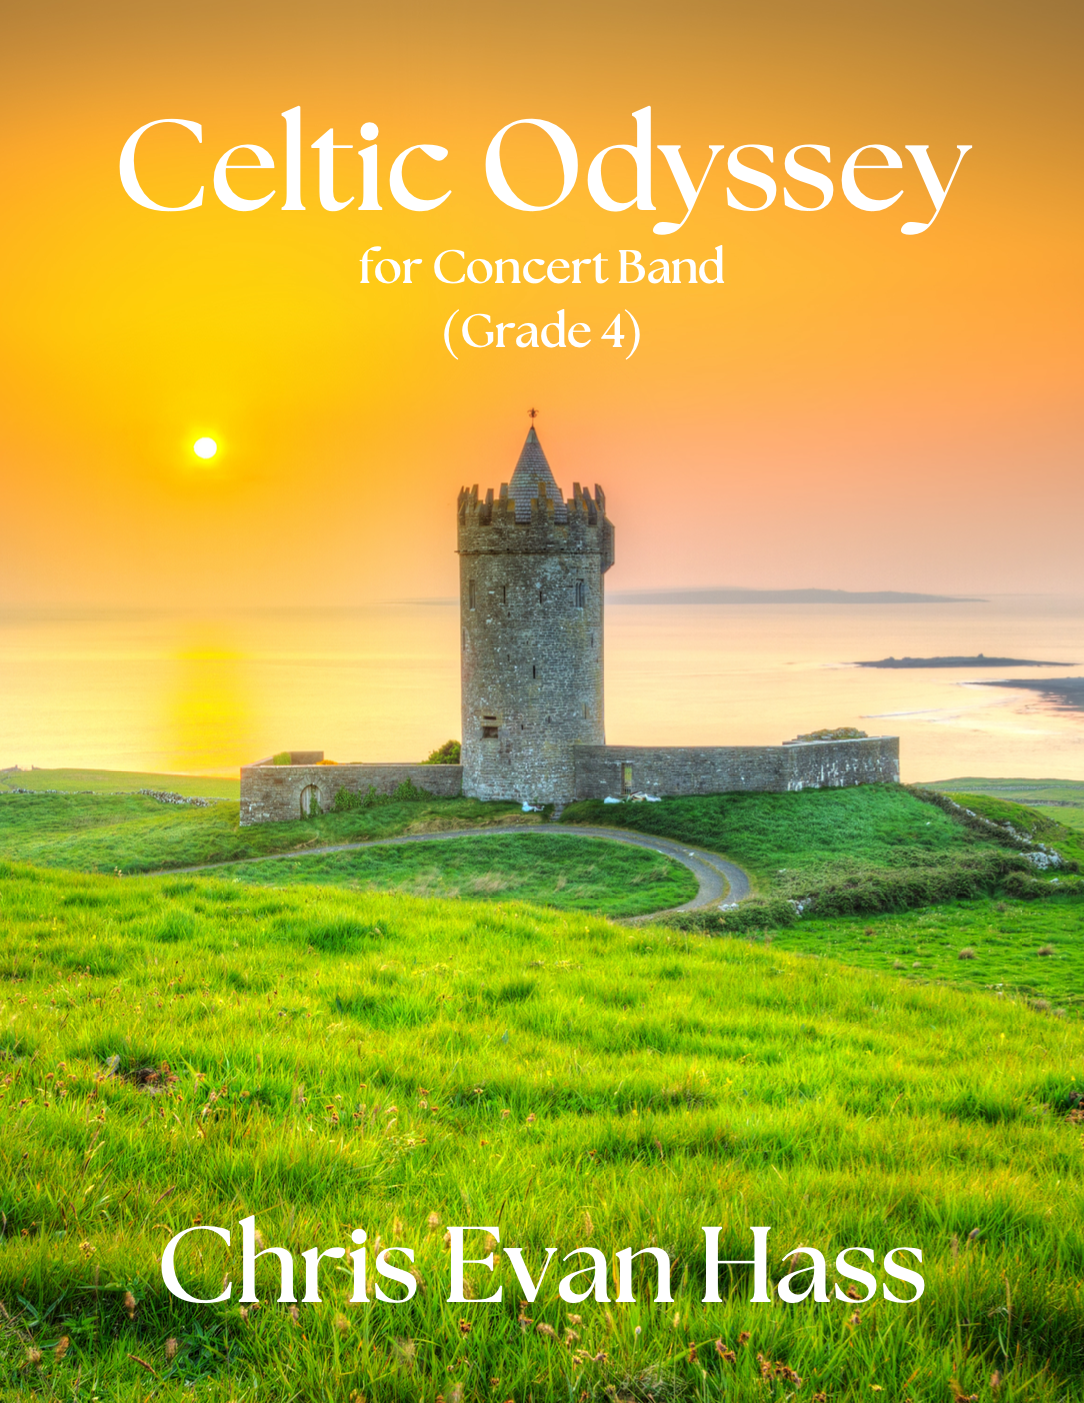 Celtic Odyssey by Chis Evan Hass